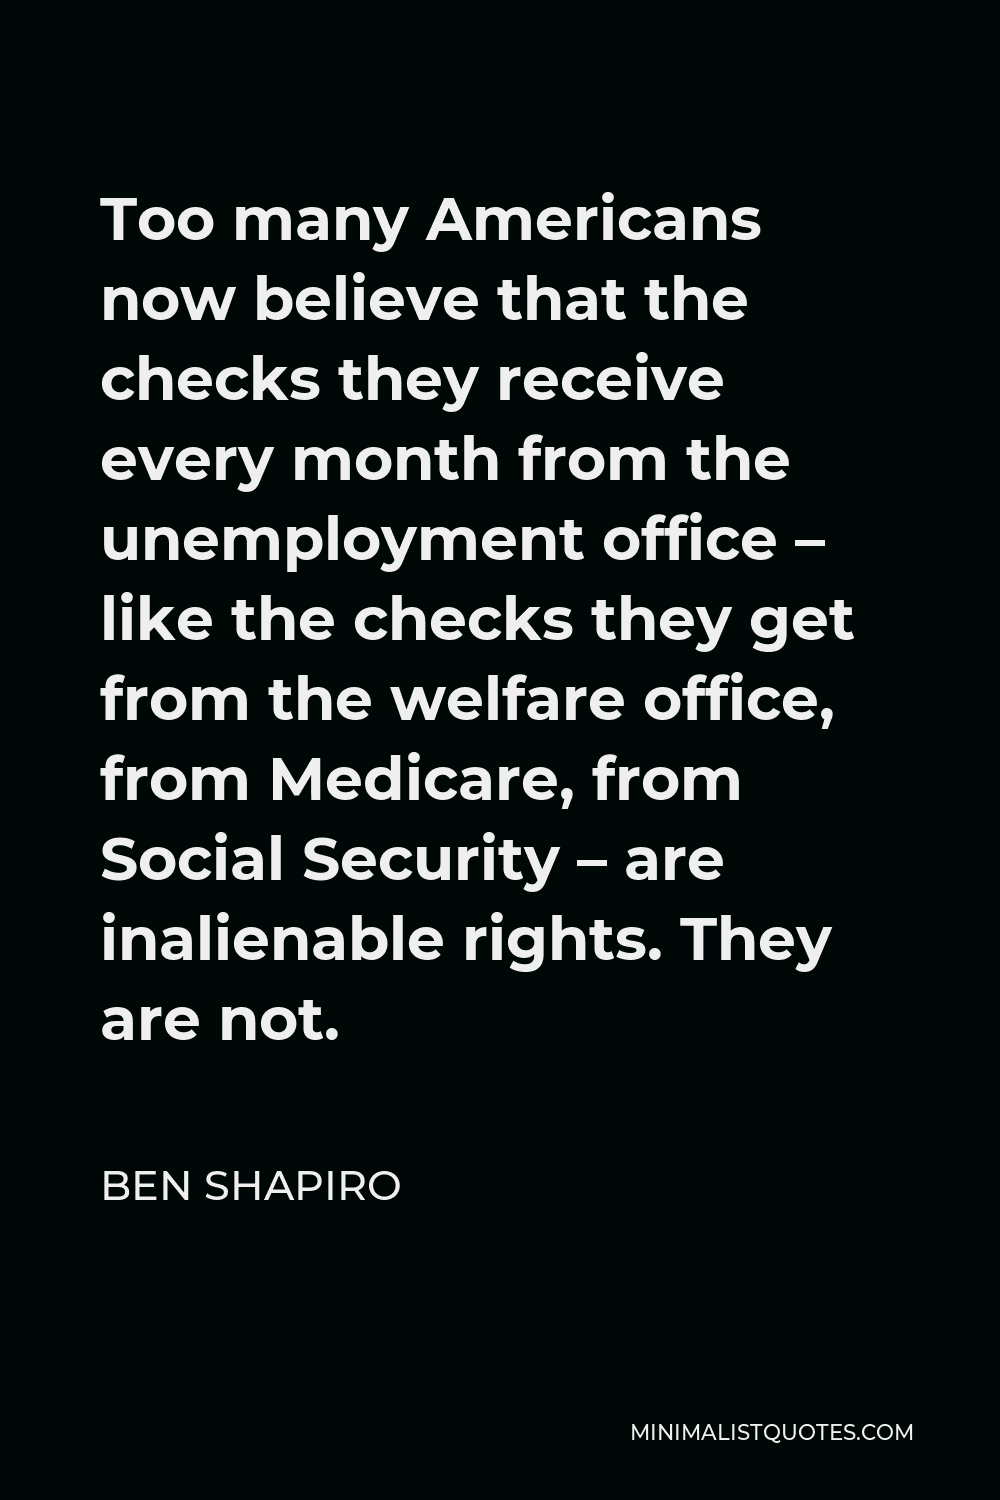 Ben Shapiro Quote - Too many Americans now believe that the checks they receive every month from the unemployment office – like the checks they get from the welfare office, from Medicare, from Social Security – are inalienable rights. They are not.